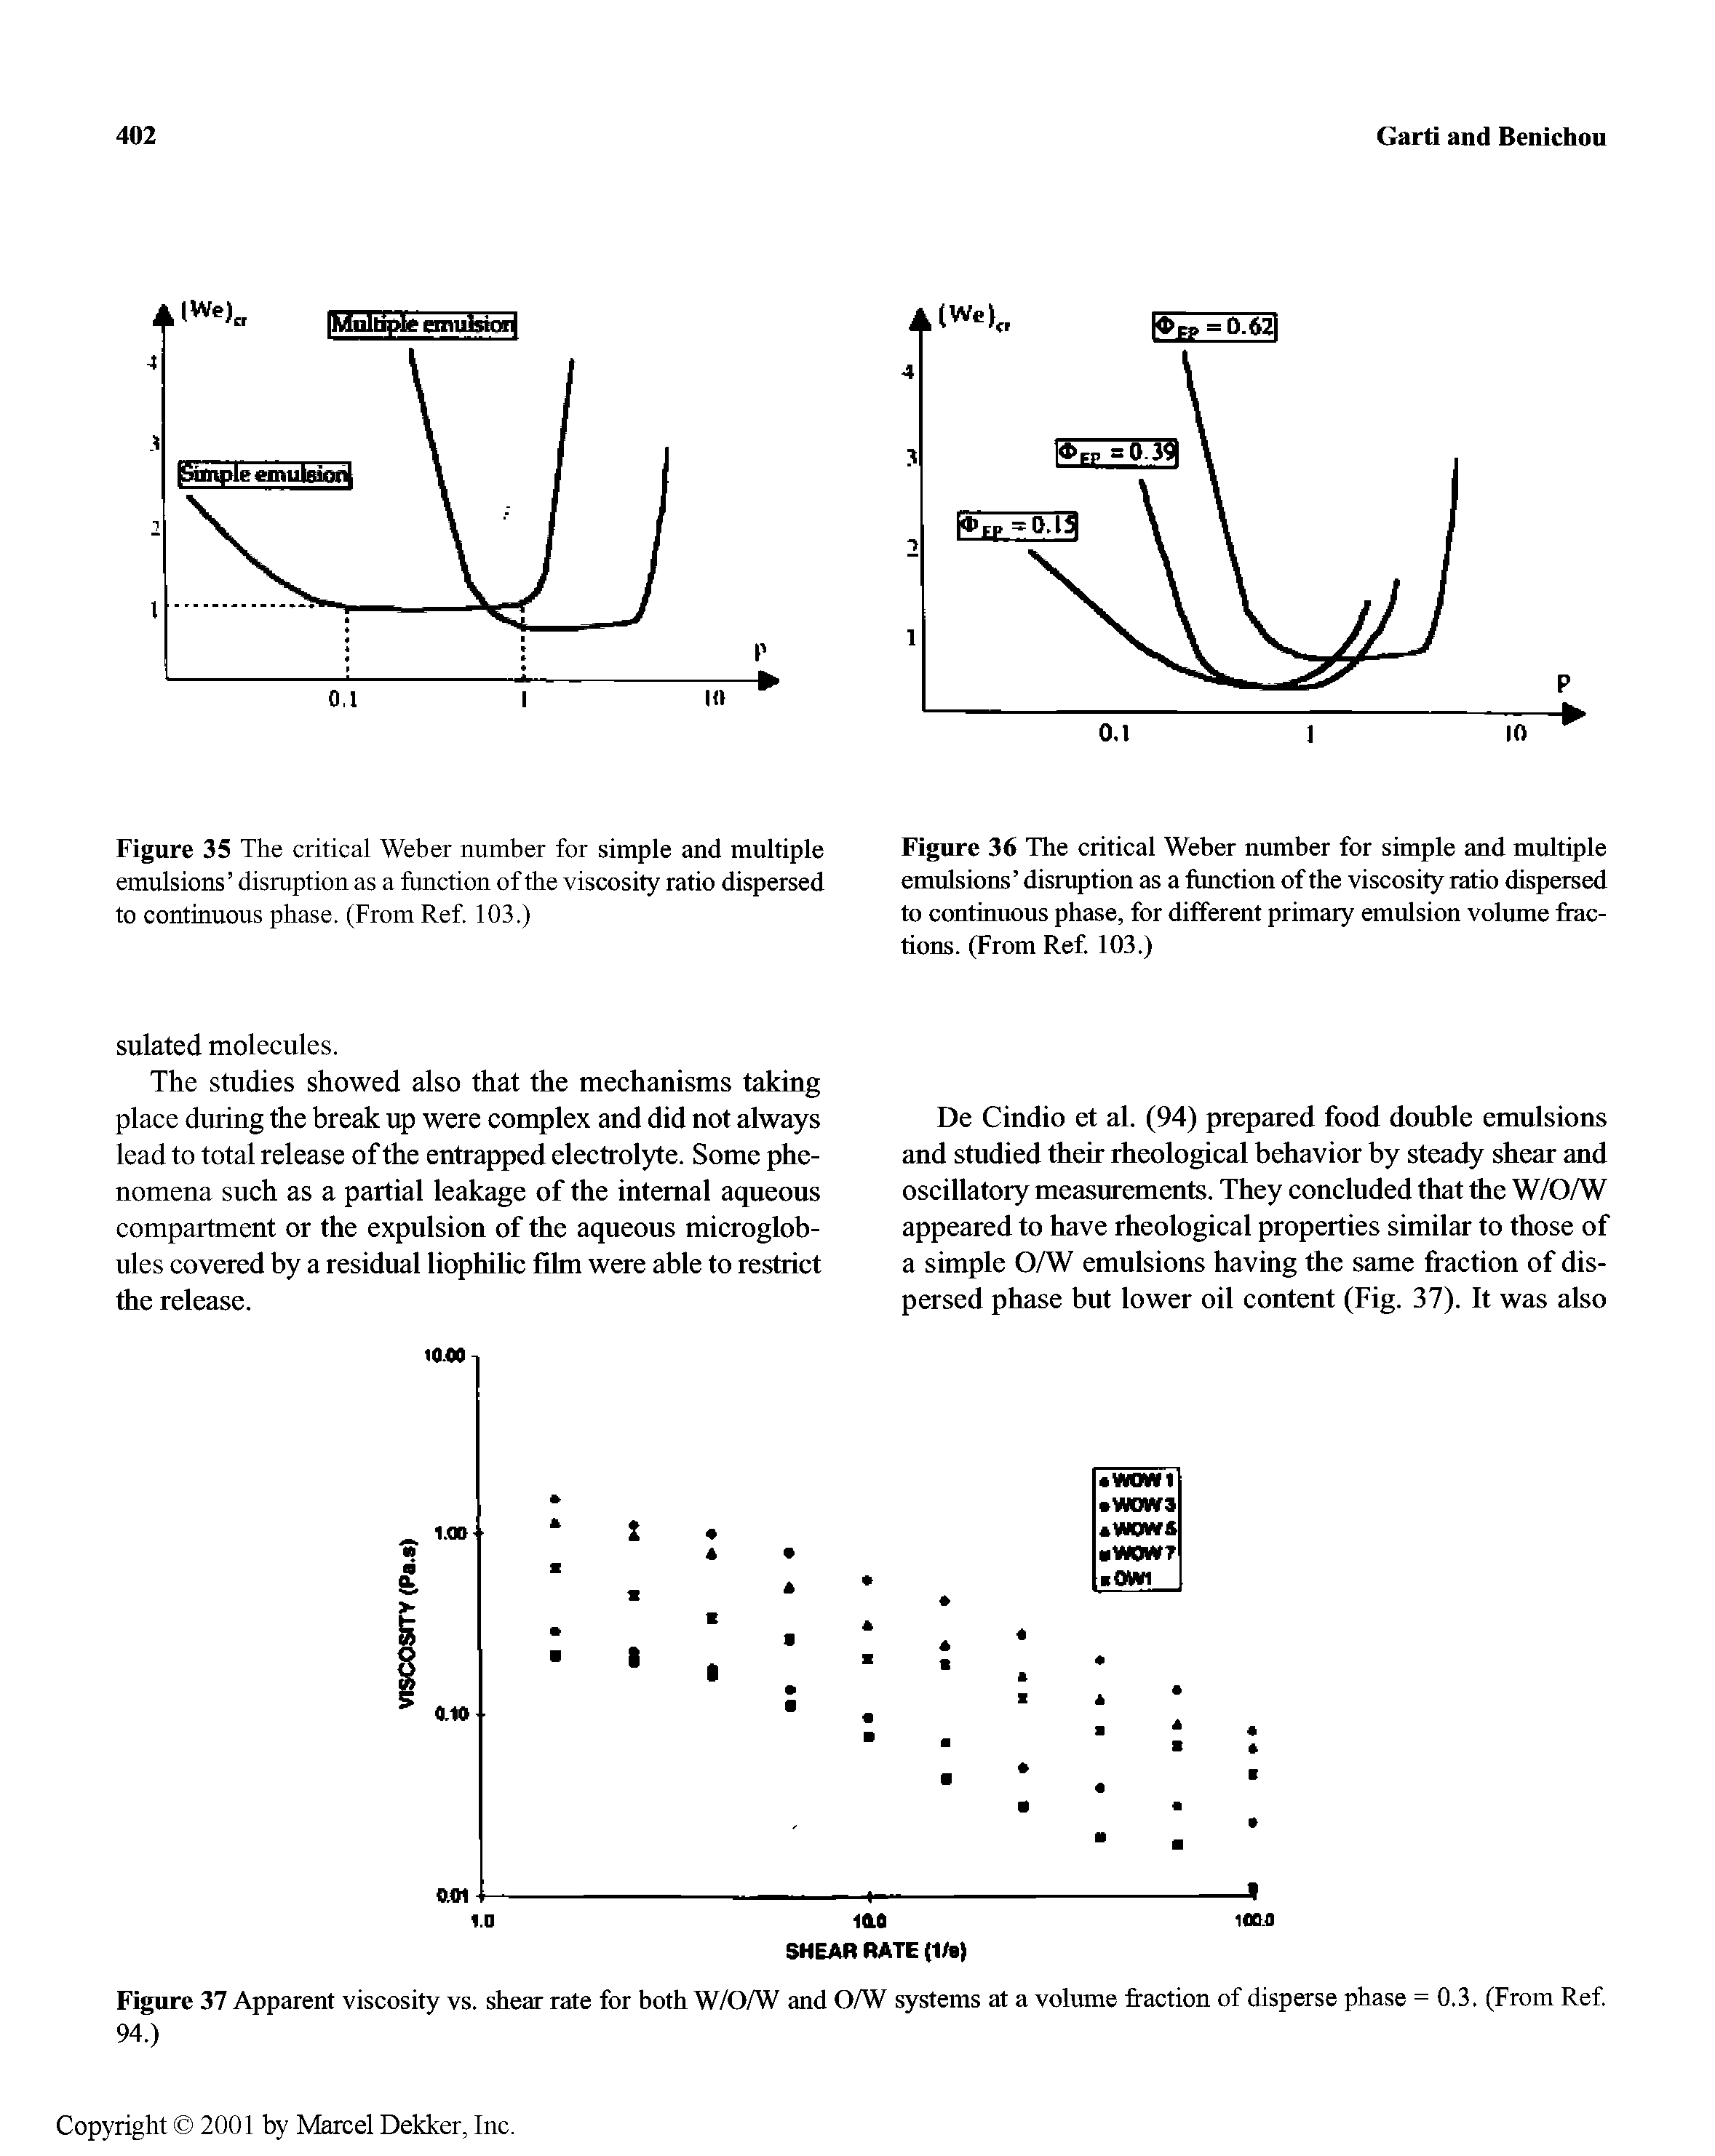 Figure 35 The critical Weber number for simple and multiple emulsions disruption as a function of the viscosity ratio dispersed to continuous phase. (From Ref 103.)...